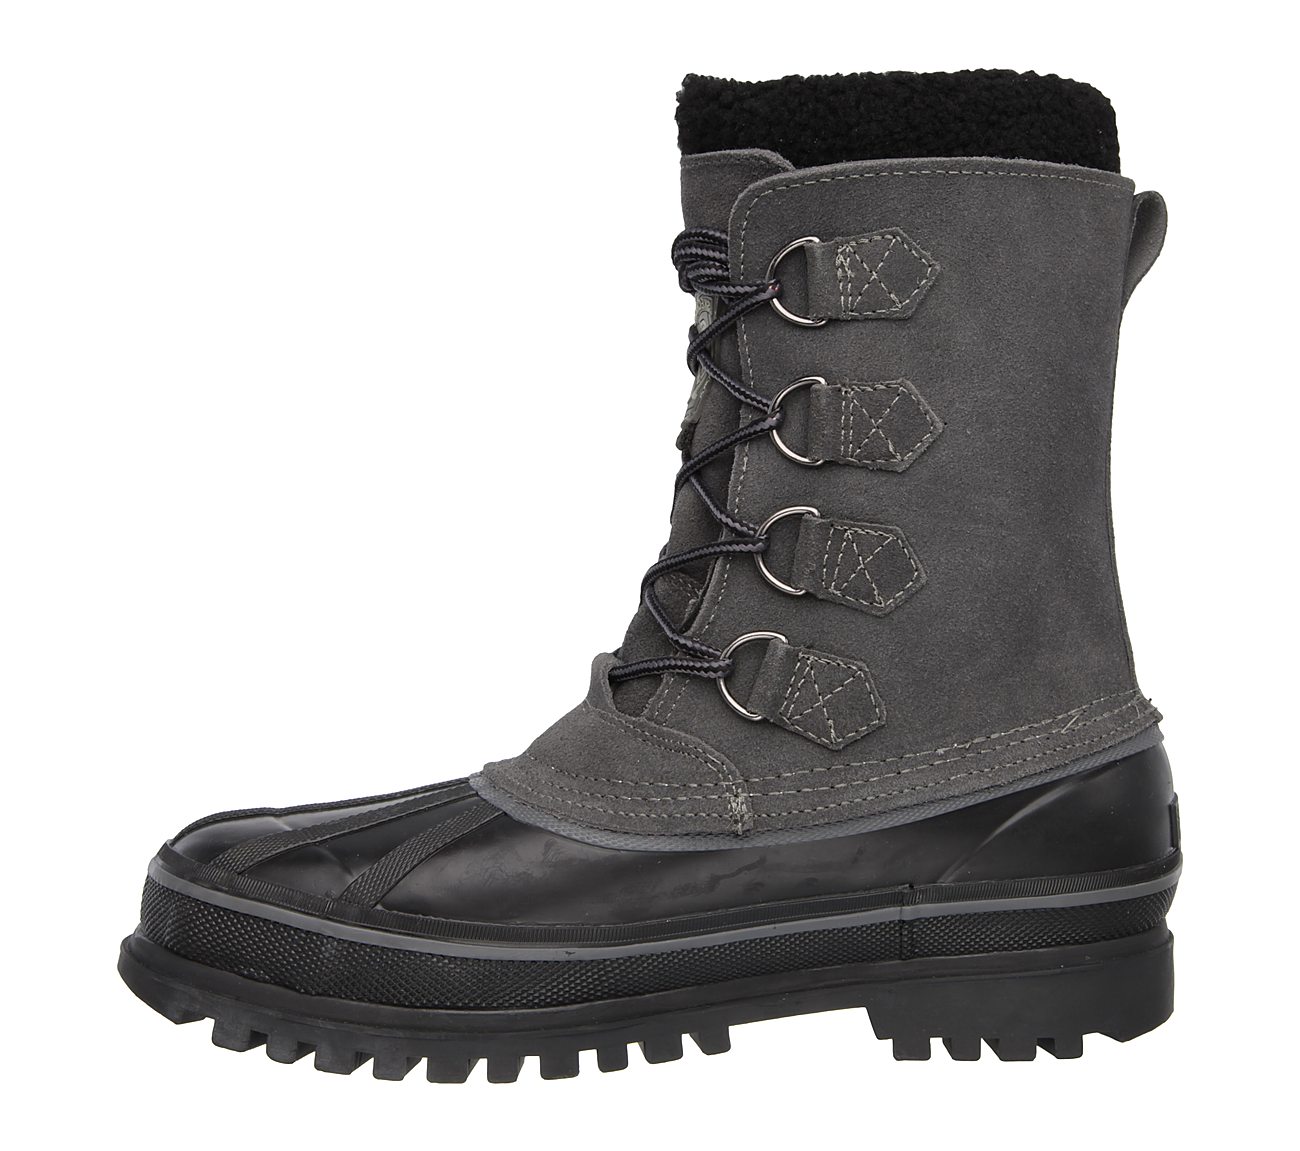 skechers thinsulate boots